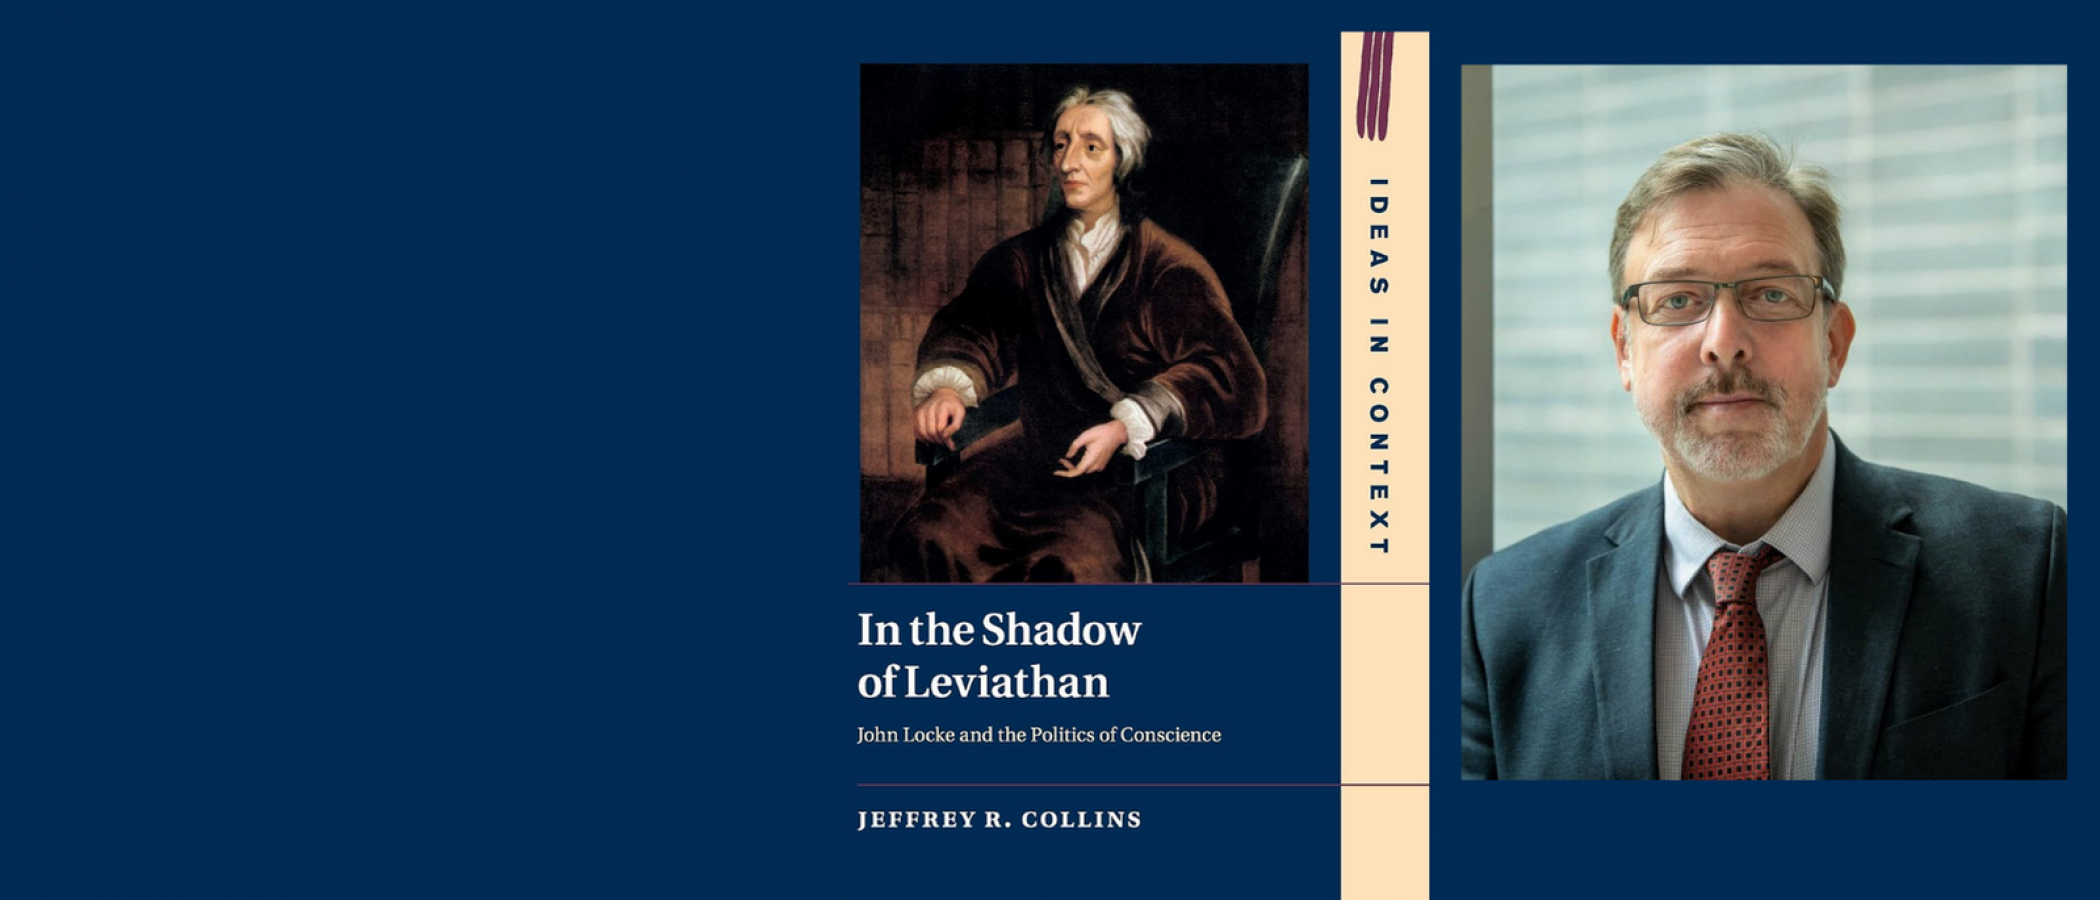 Image of Jeff Collin's book cover with an image of John Locke